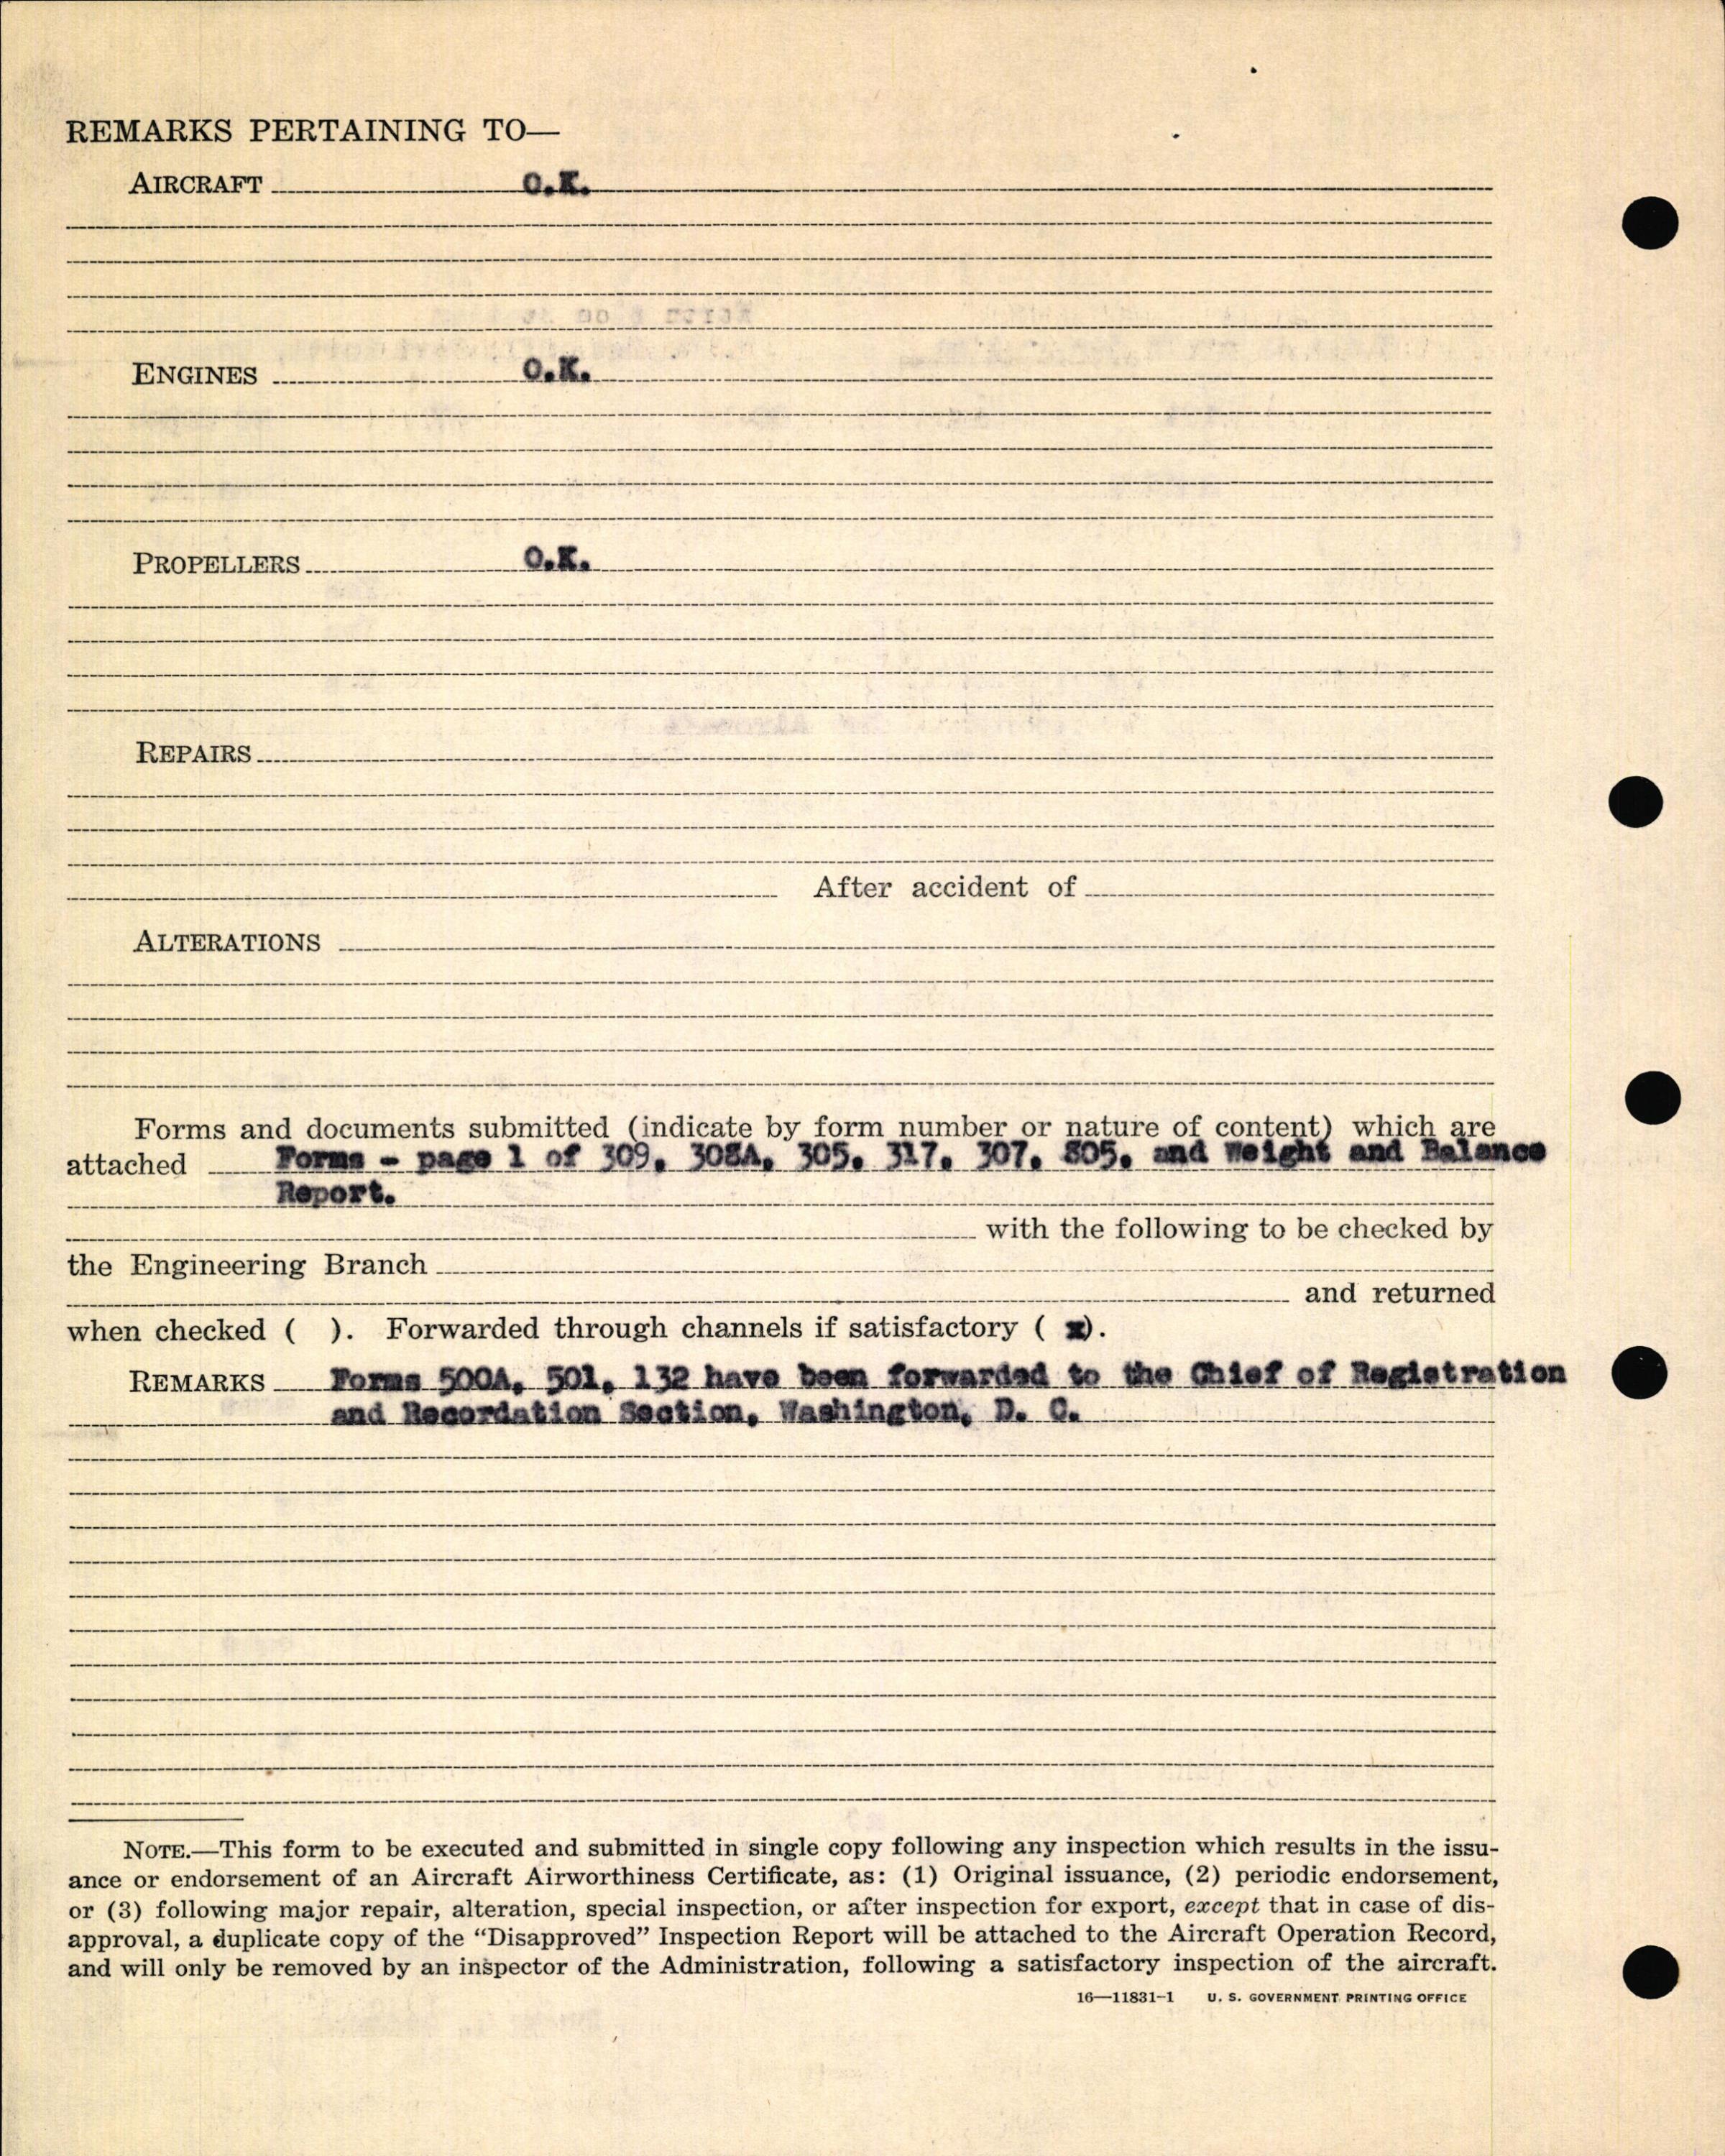 Sample page 10 from AirCorps Library document: Technical Information for Serial Number 97